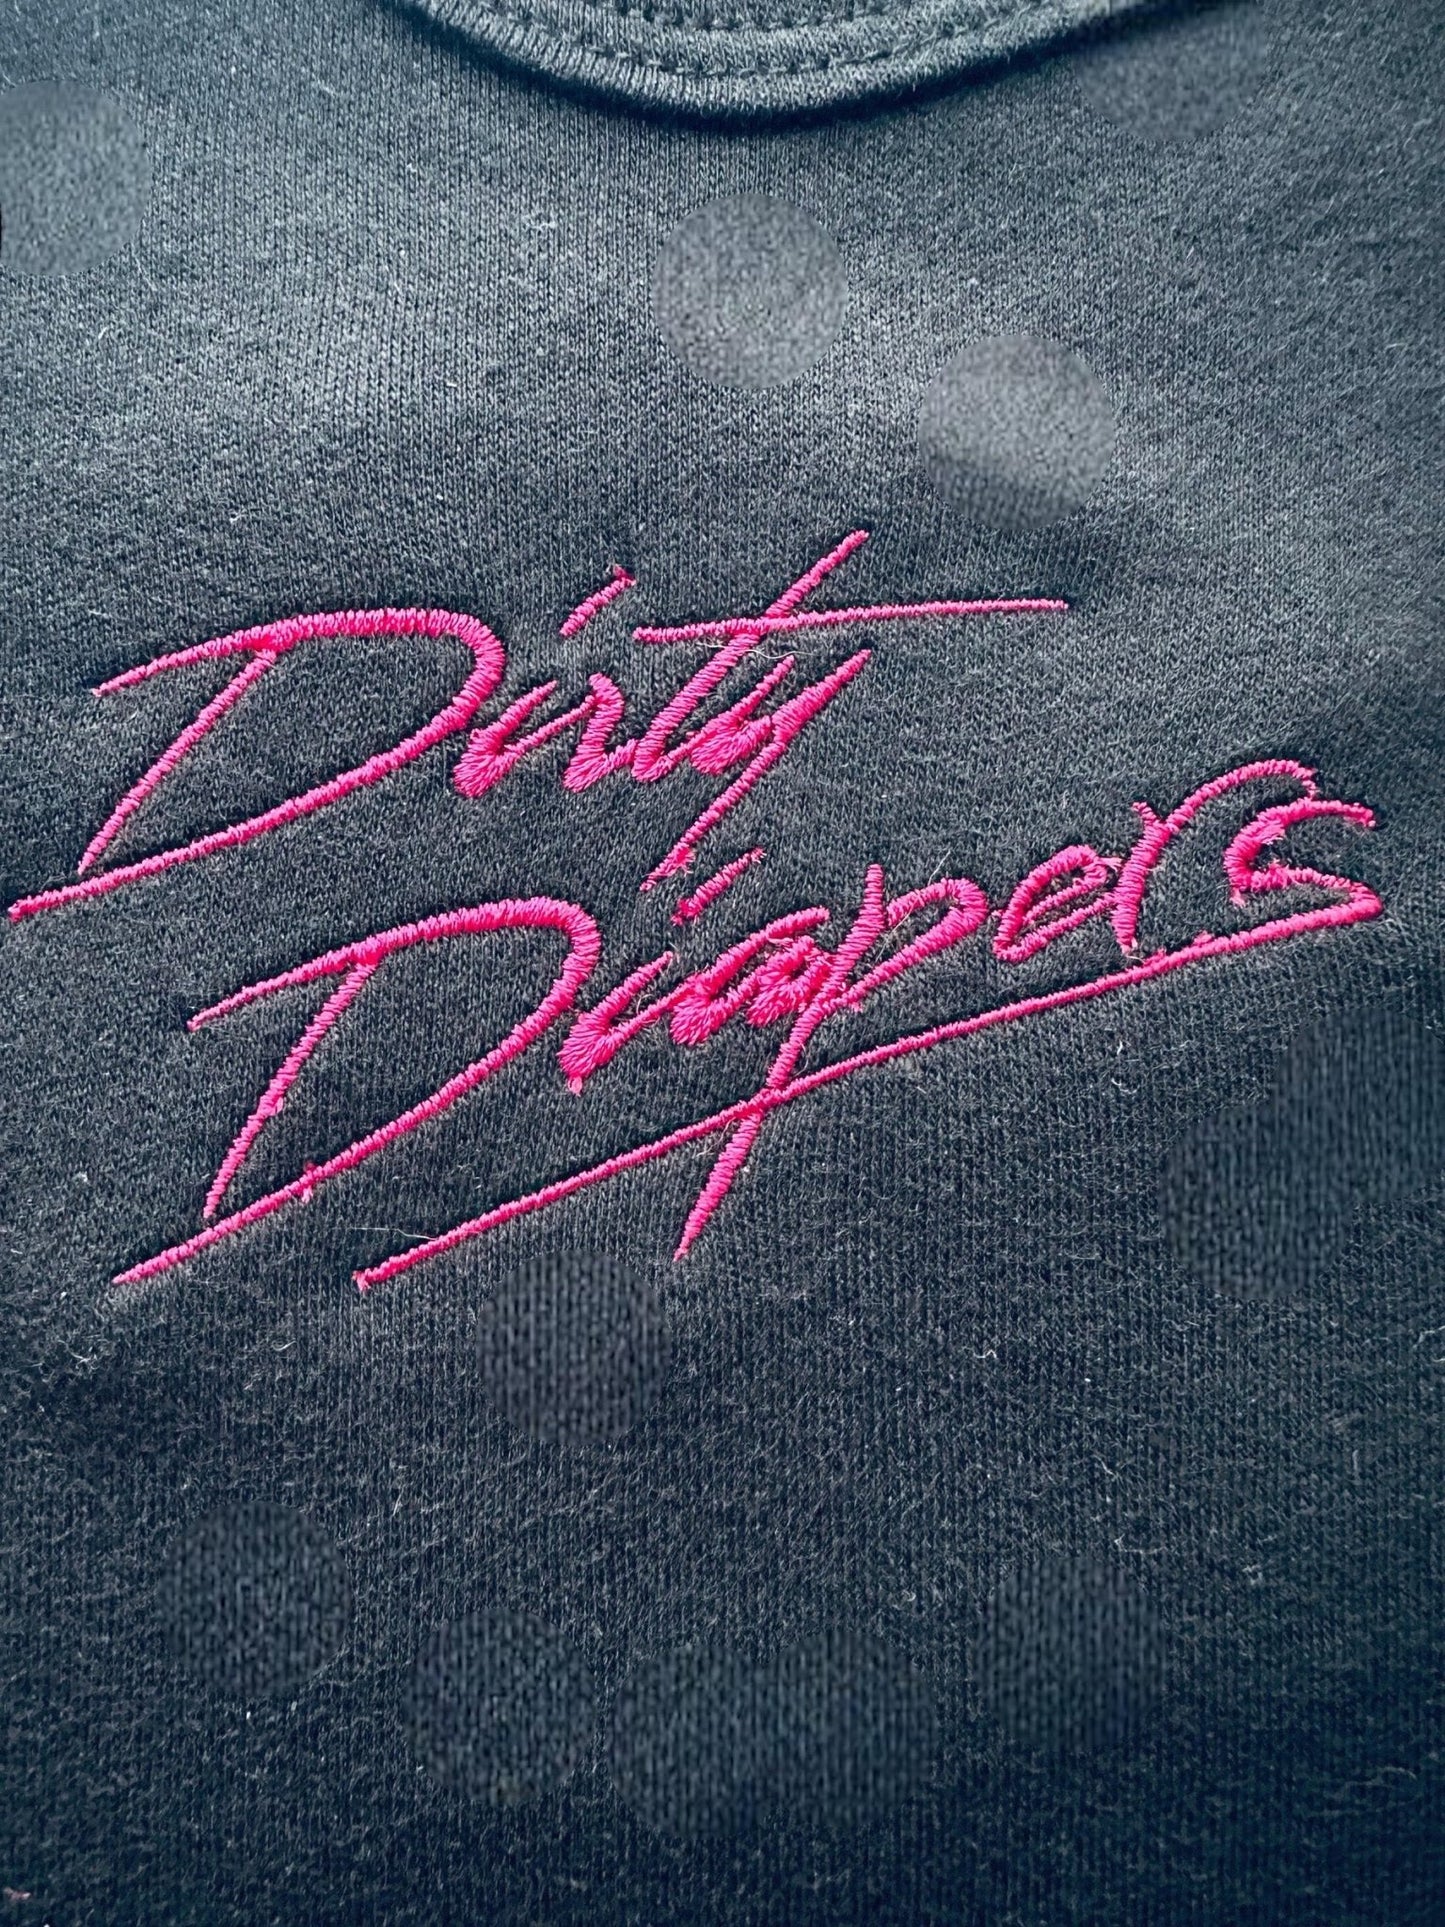 "Dirty Diapers" Embroidered Onesie - Blue Kangaroo Clothing